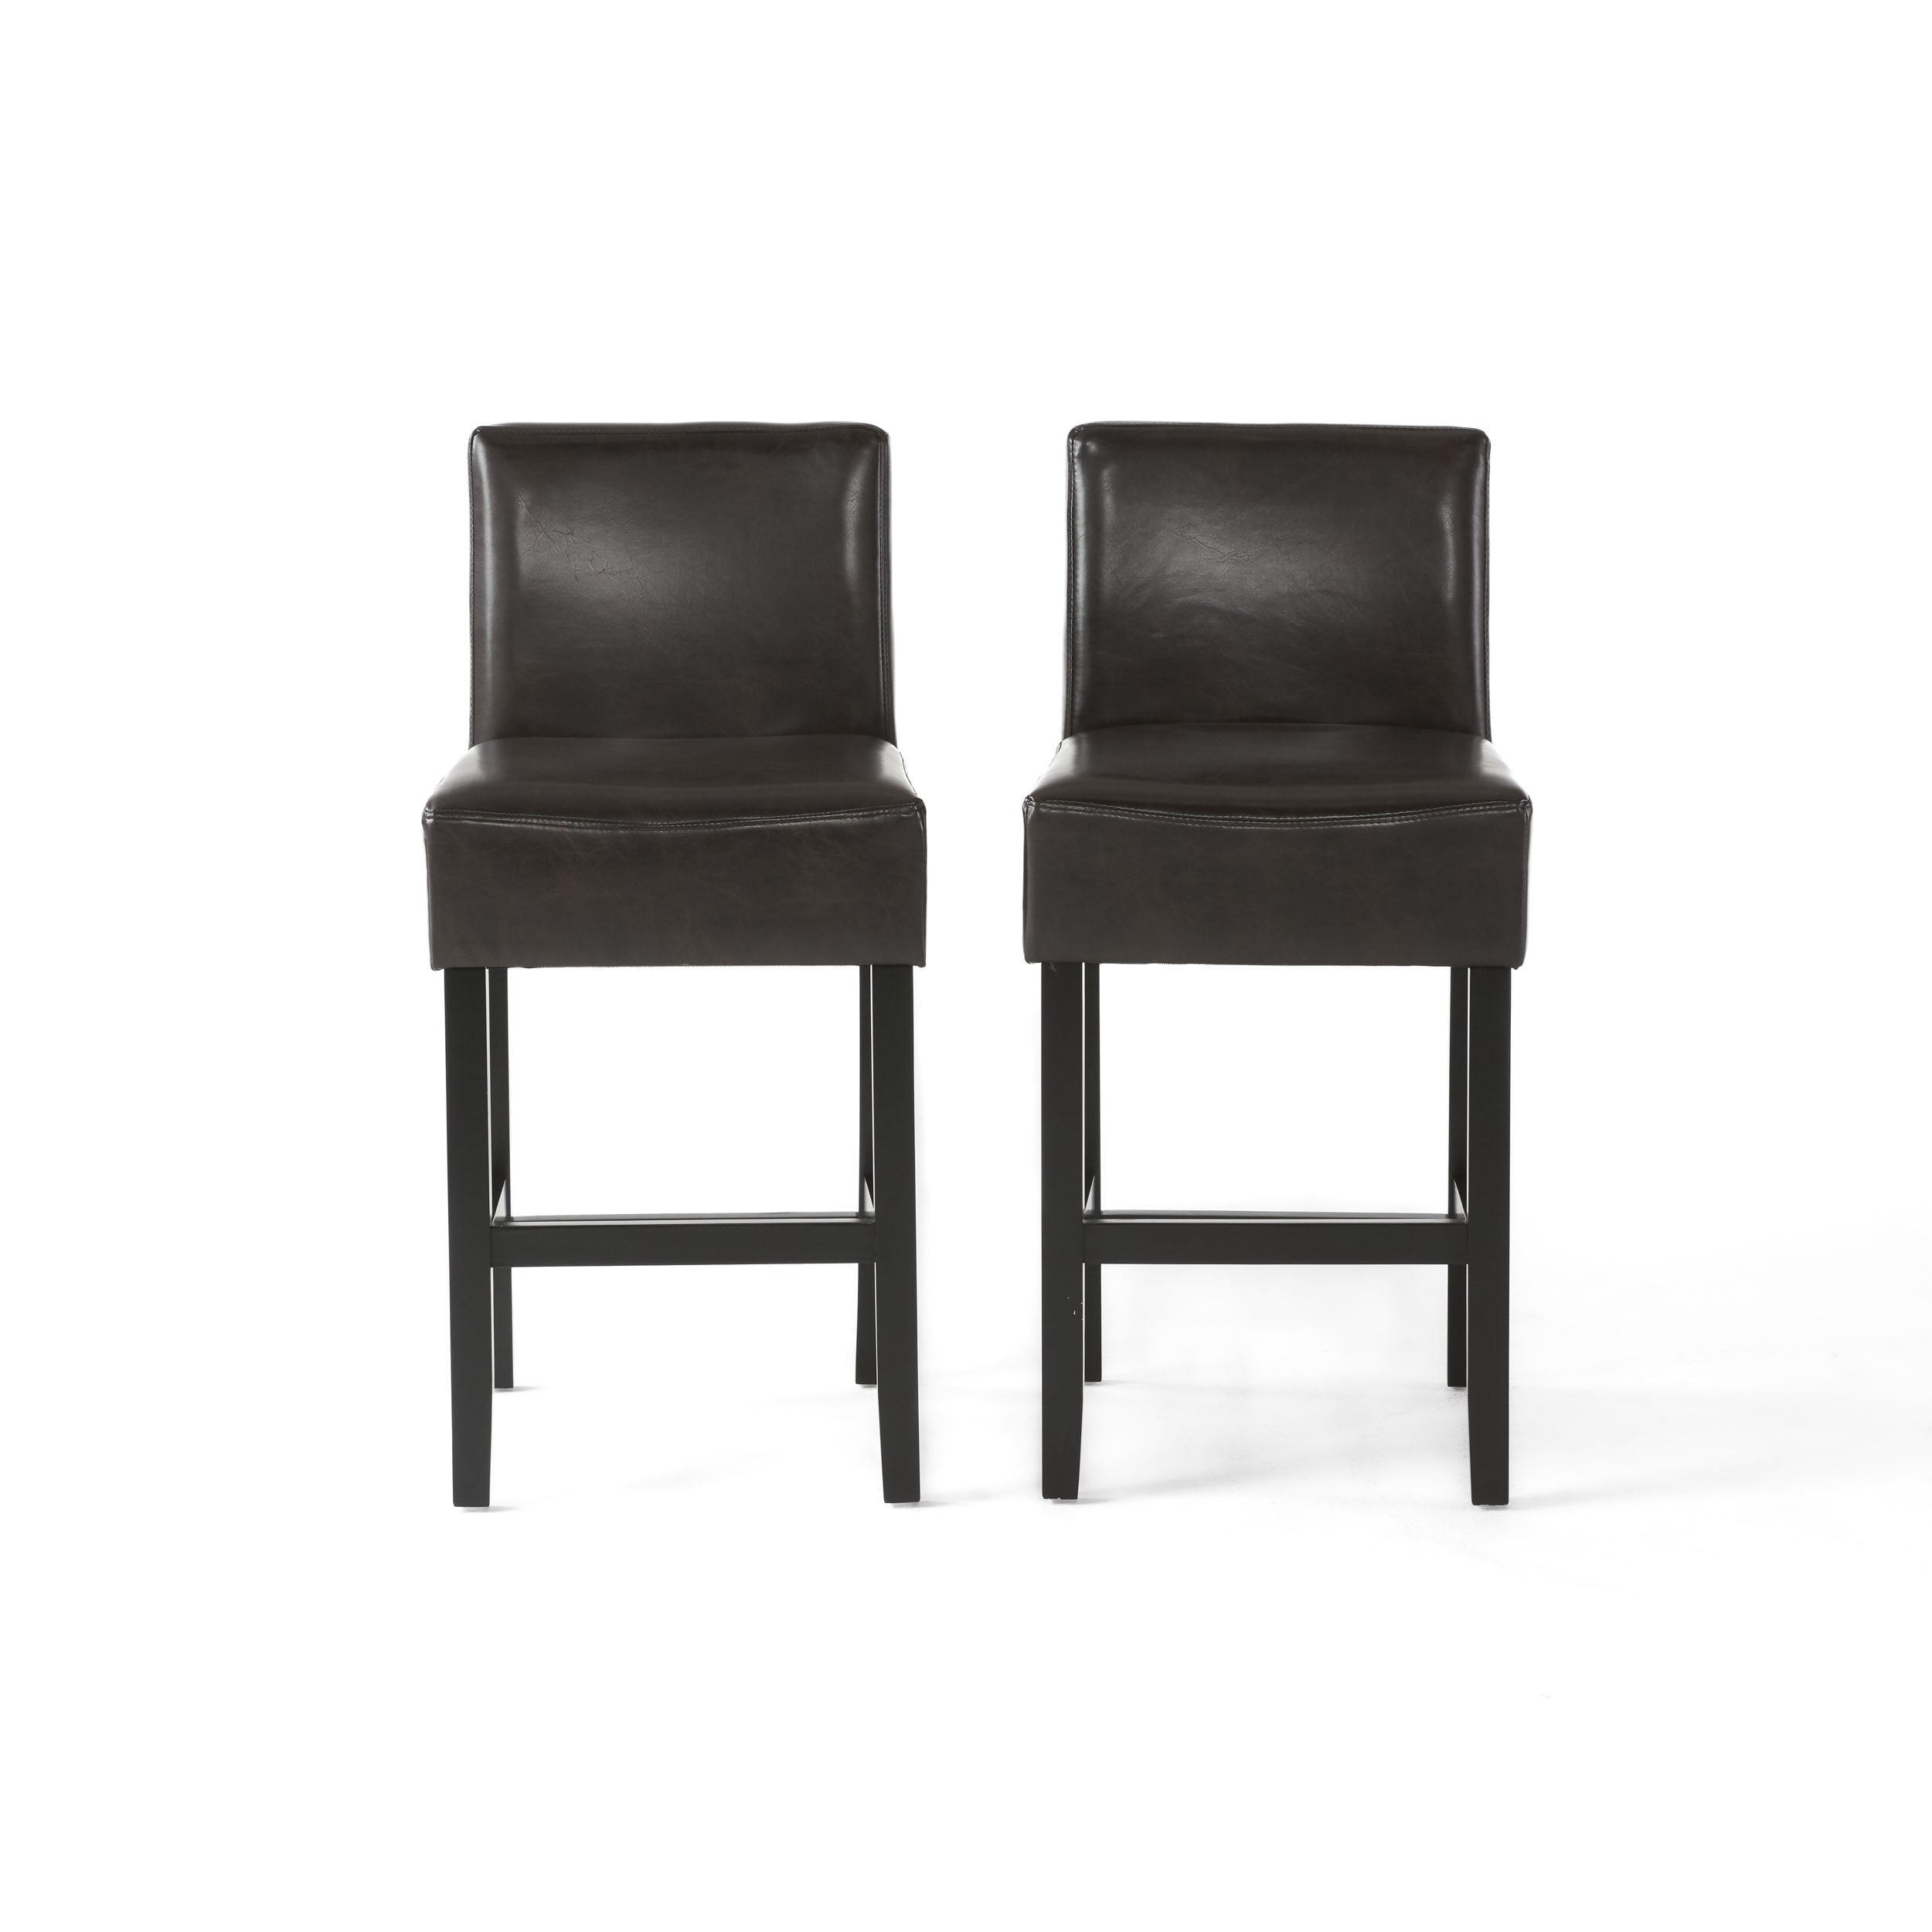 Christopher Knight Home Lopez 26-inch Brown Leather Counterstools (Set of 2)